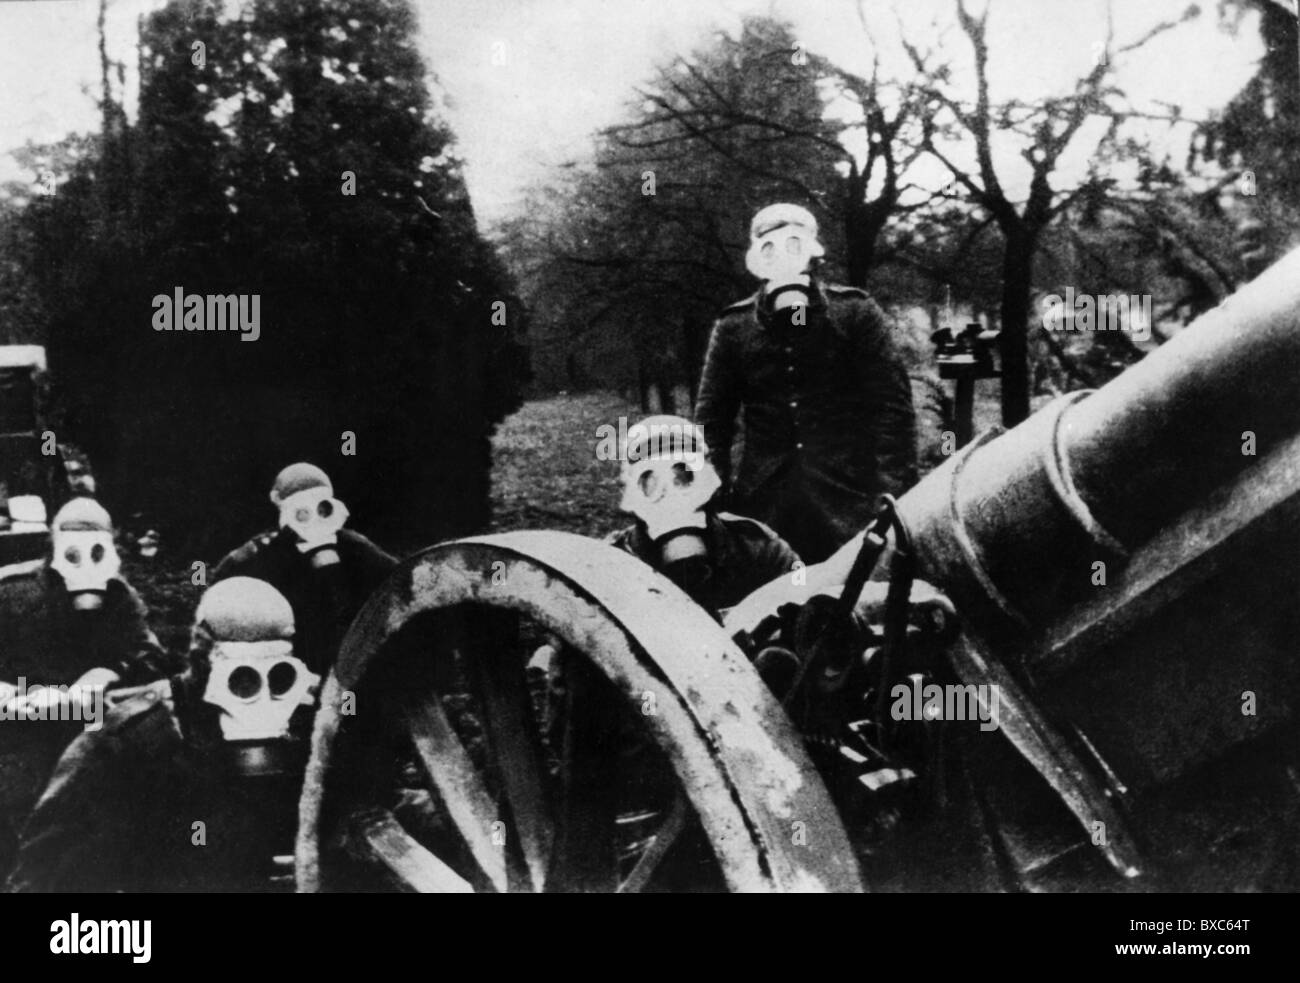 events, First World War / WWI, Western Front, gun crew with gas masks, 9th battery / 1st Bavarian Field Artillery Regiment, France, 1916, Additional-Rights-Clearences-Not Available Stock Photo